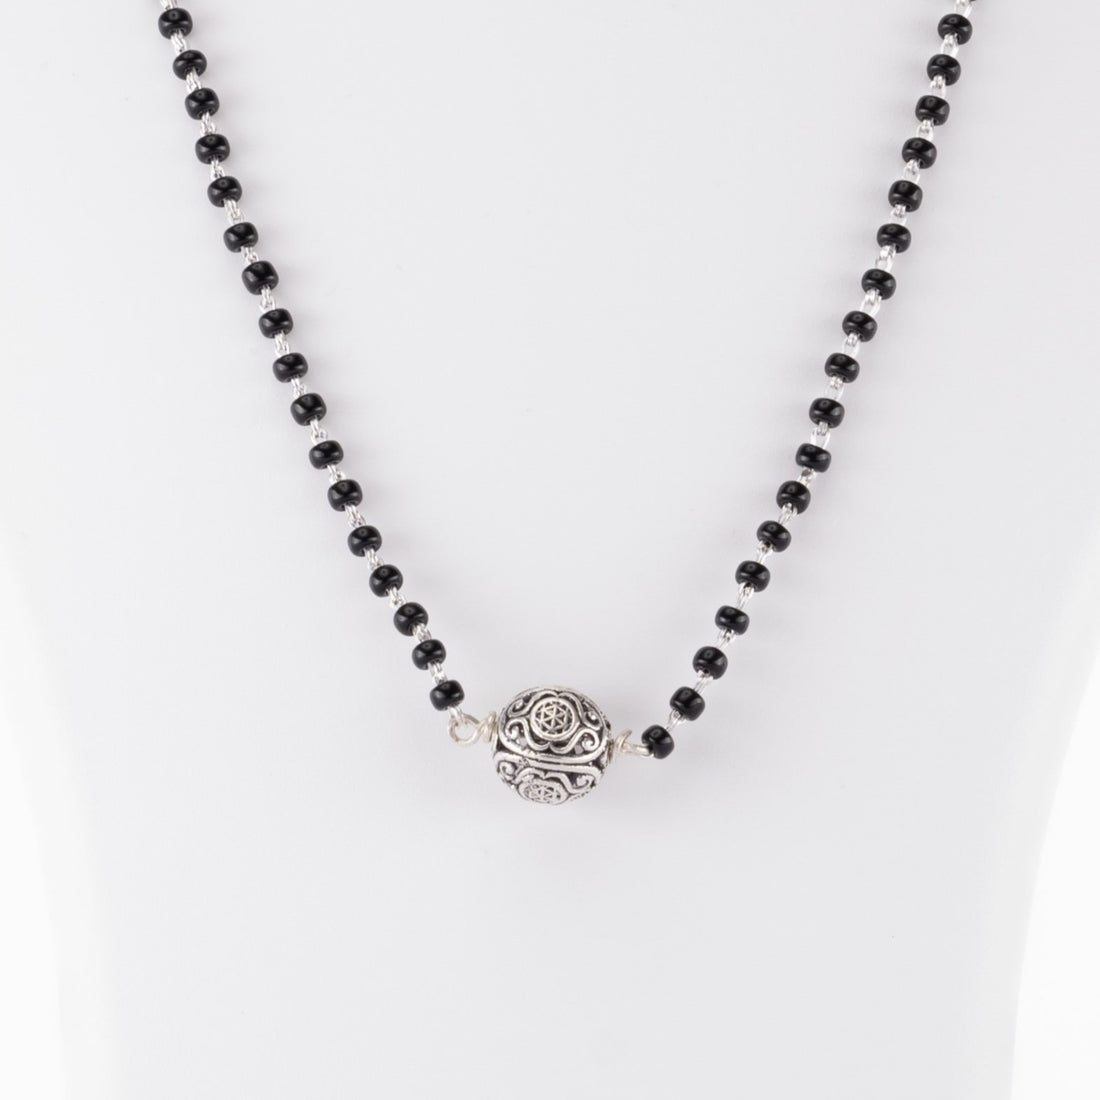 Original Black Beads Mangal Sutra with Silver Circular Pendant for Women